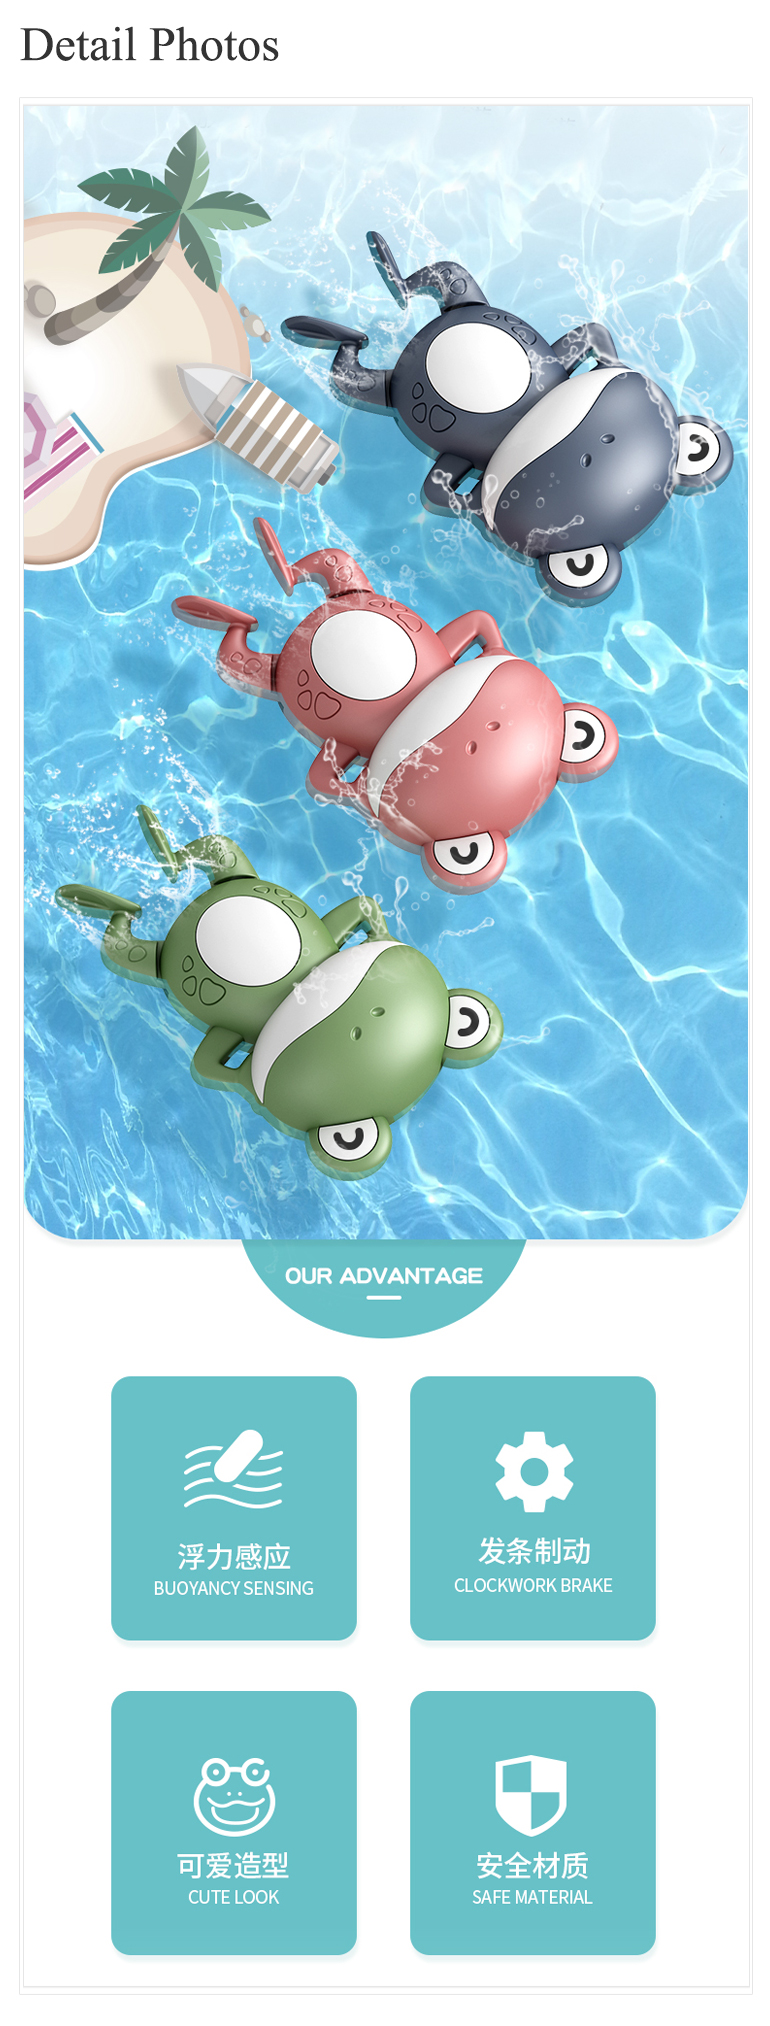 Buoyancy induction swimming frog baby bath toy